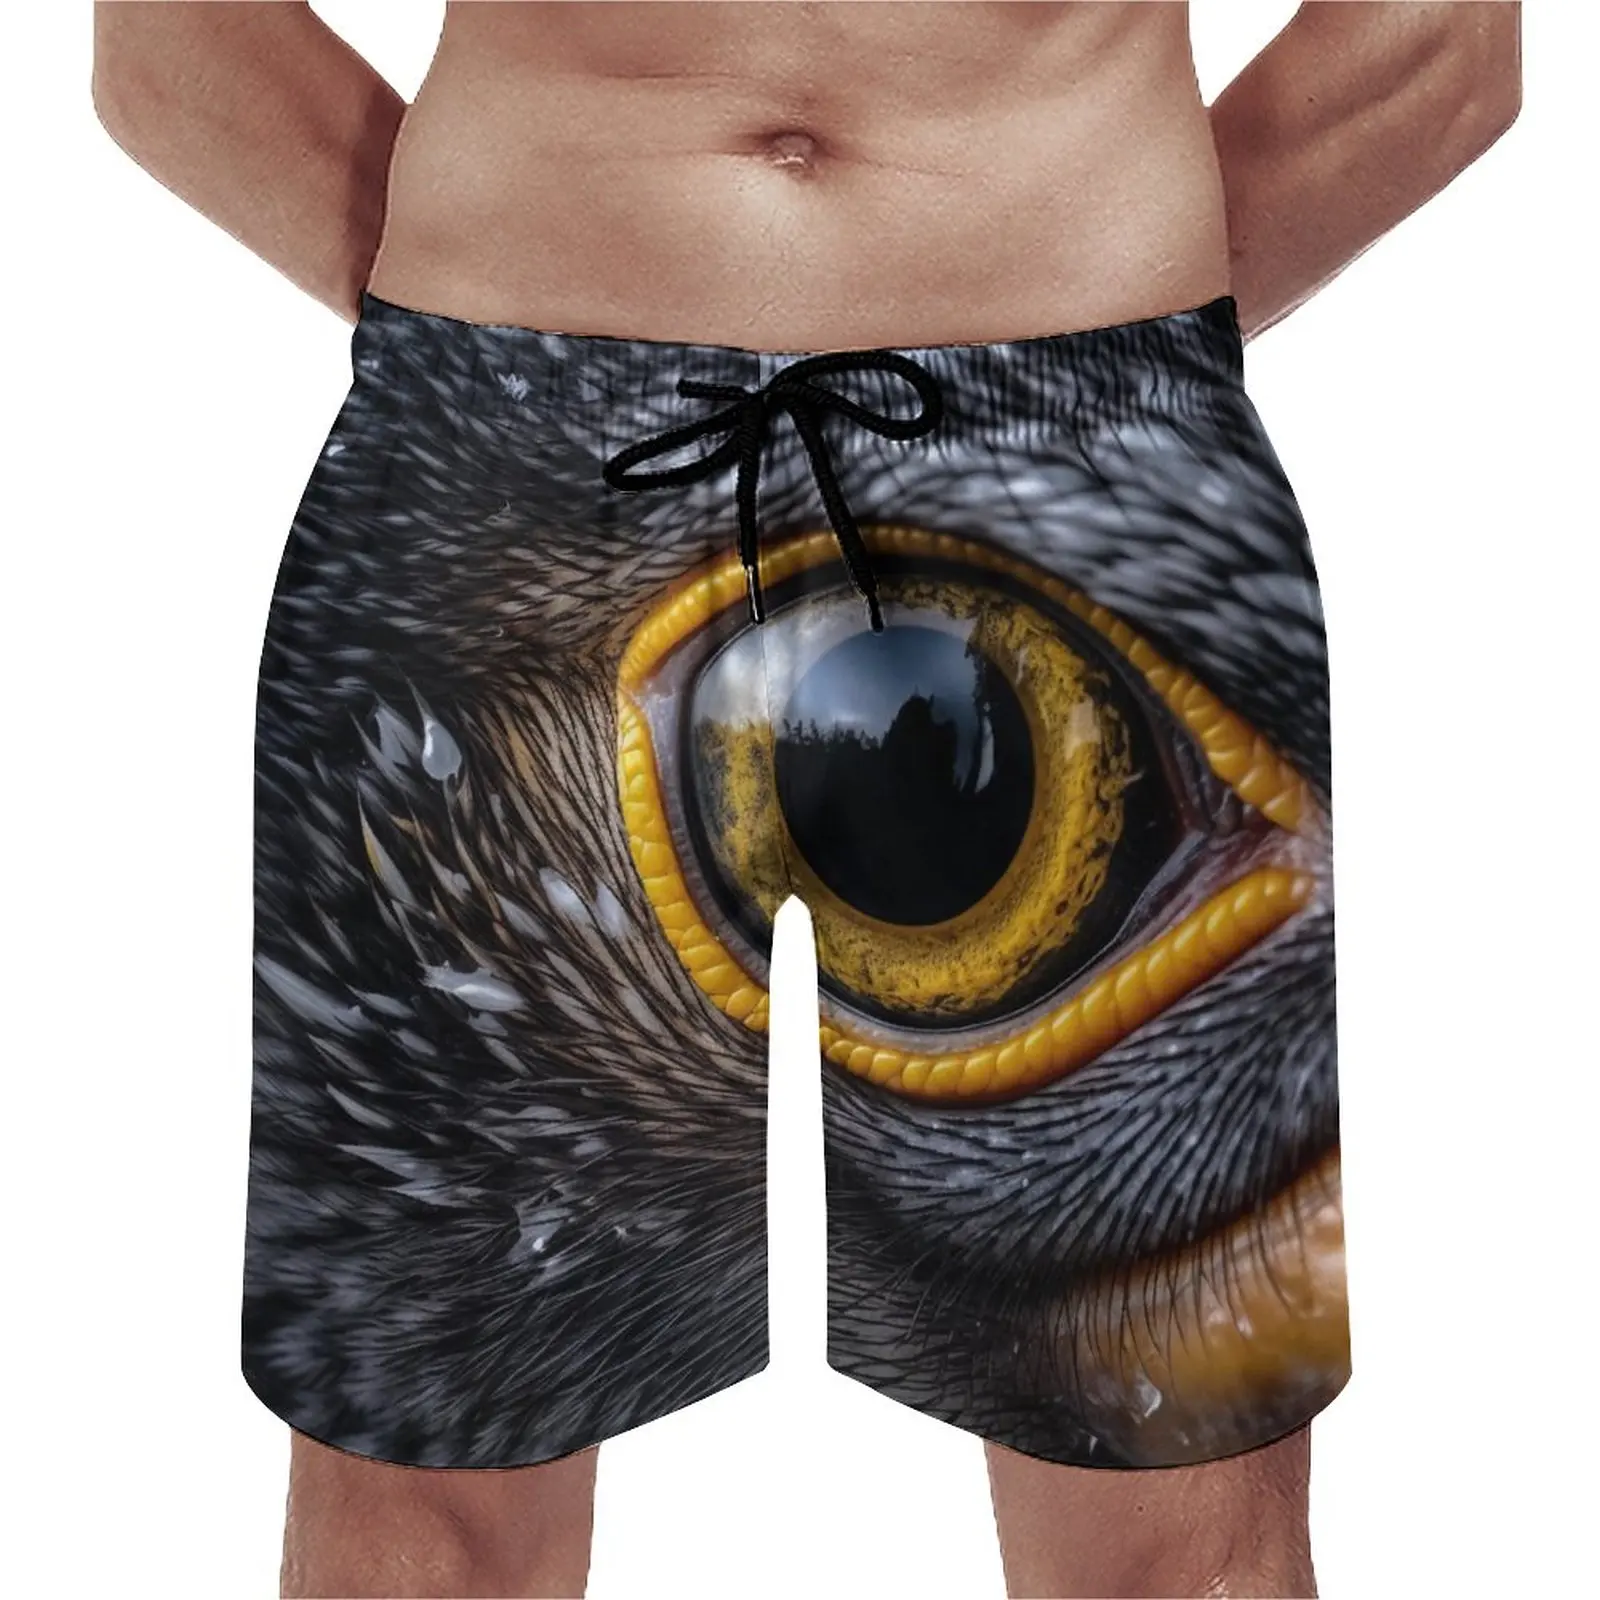 

Board Shorts Penguin Cute Hawaii Swim Trunks Animal Eyes Males Quick Dry Running Surf Hot Sale Large Size Beach Short Pants